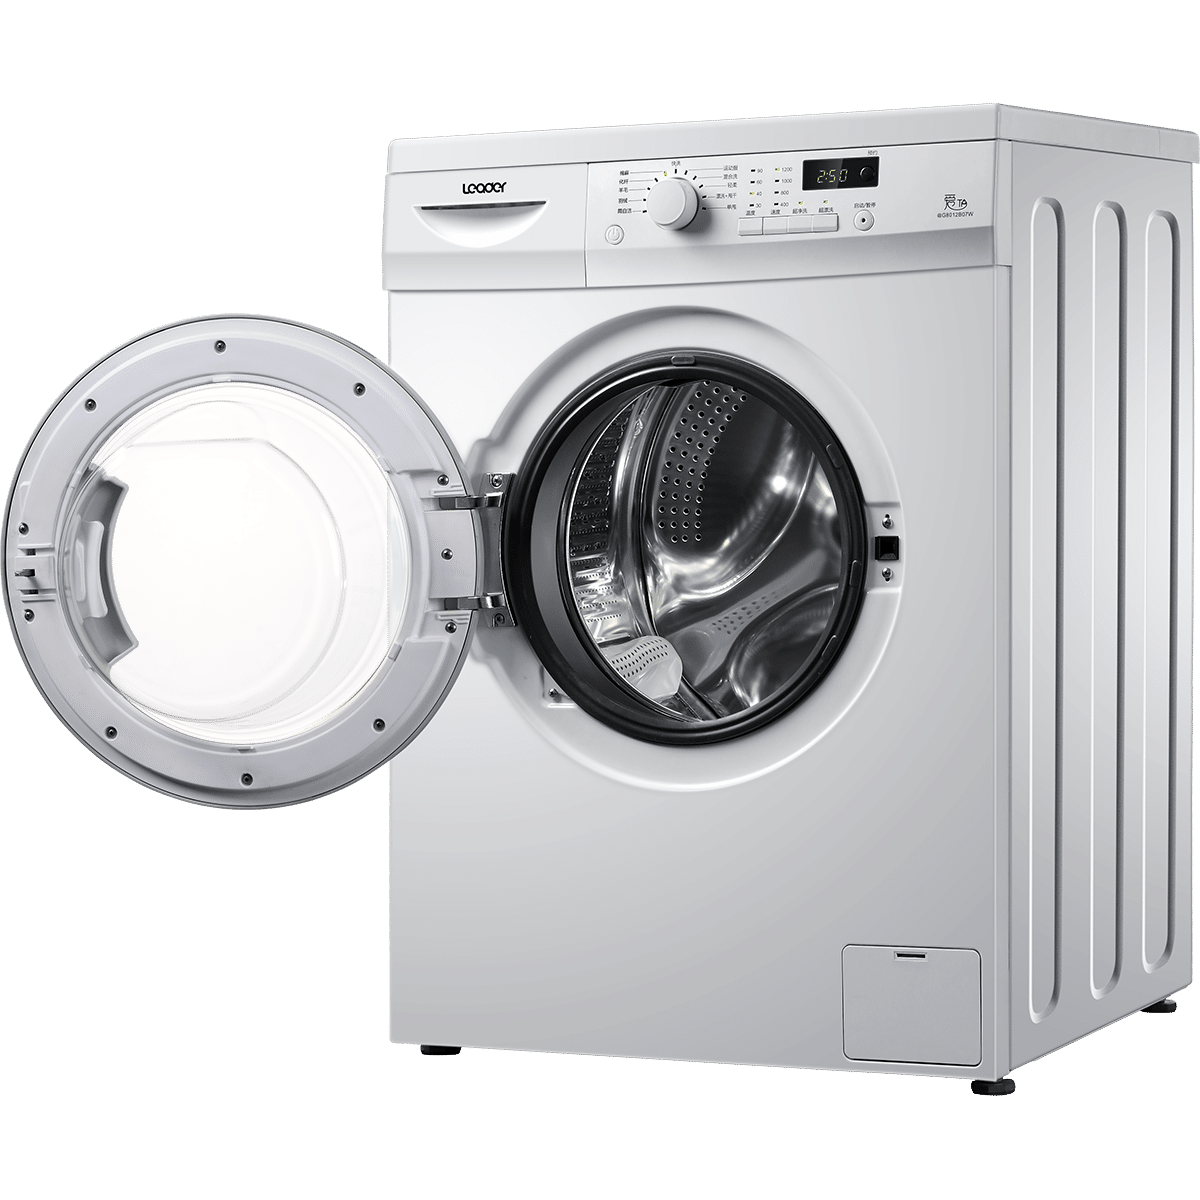 dryer services and repair